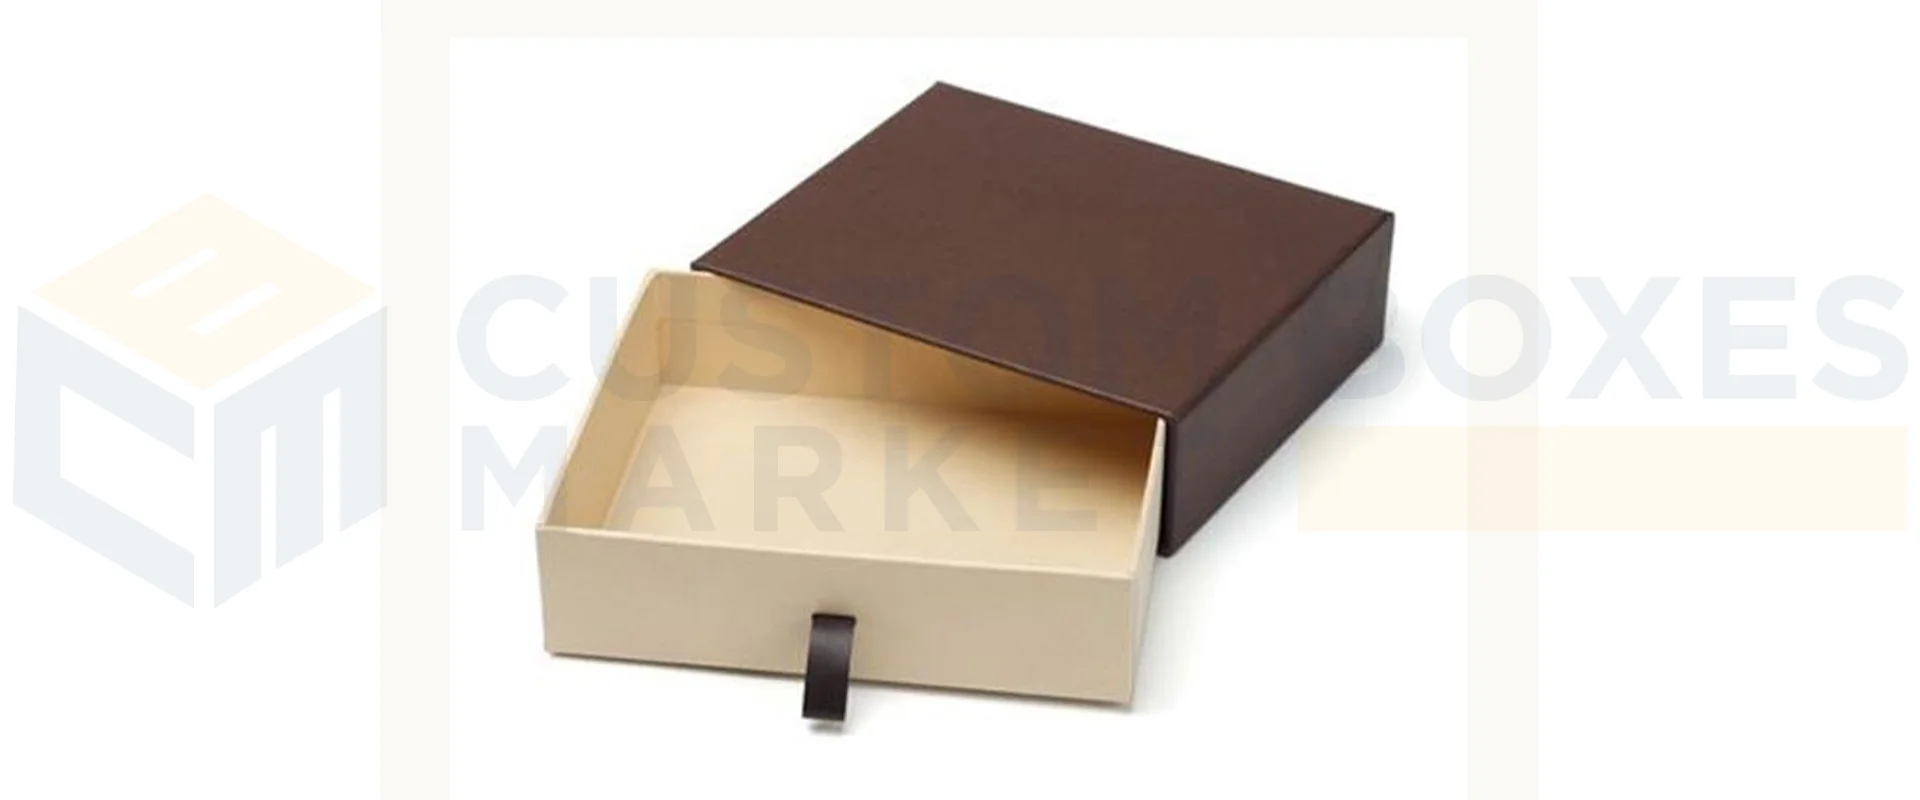 Sleeve Boxes: Versatile Packaging Solutions for Your Products